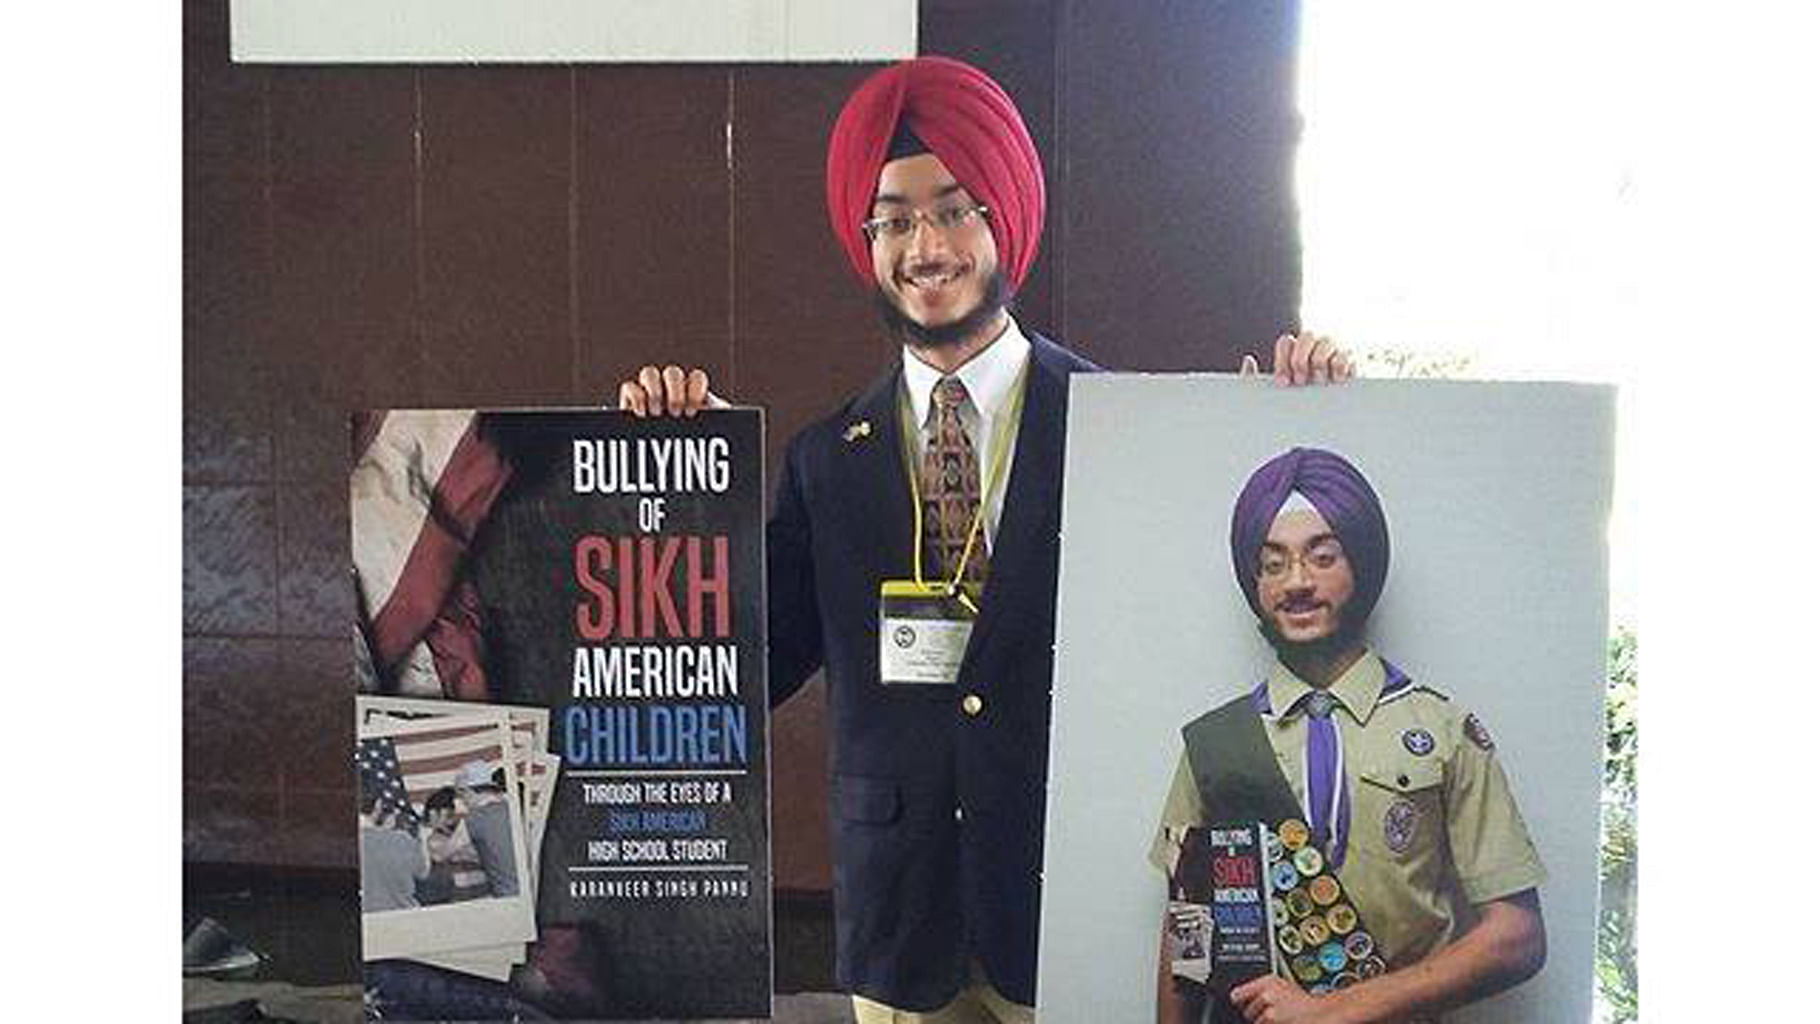 Karanveer Singh Pannu at the National Conference on Bullying in Orlando, Florida. (Photo Courtesy: Facebook/<a href="https://www.facebook.com/Schoolsafety911/photos/pcb.10154090790161542/10154090789706542/?type=3&amp;theater">School Safety Advocacy Council</a>)